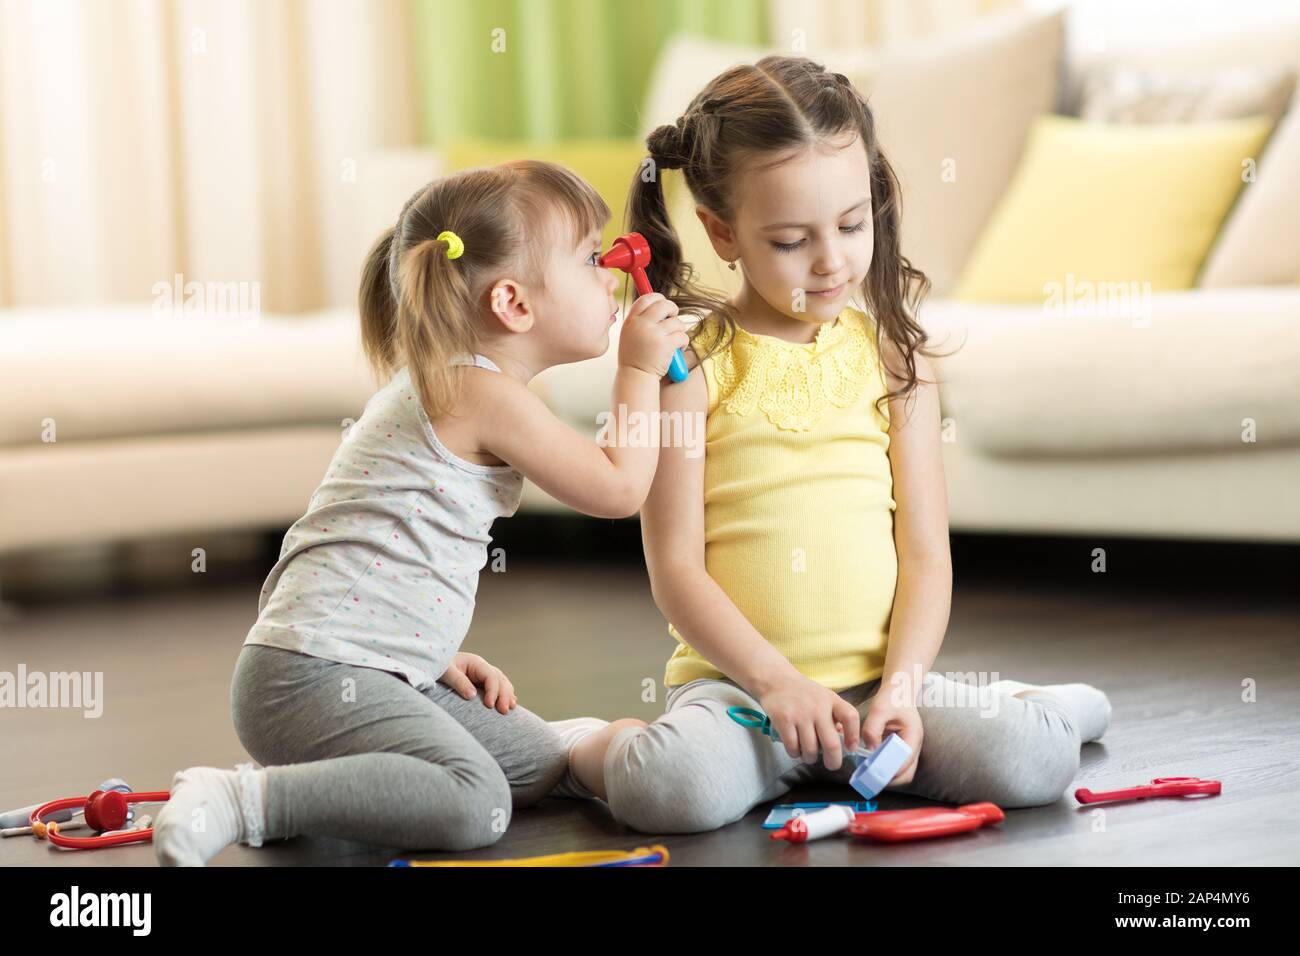 Funny kids playing doctor with toy tools. Children sitting on floor in living room Stock Photo